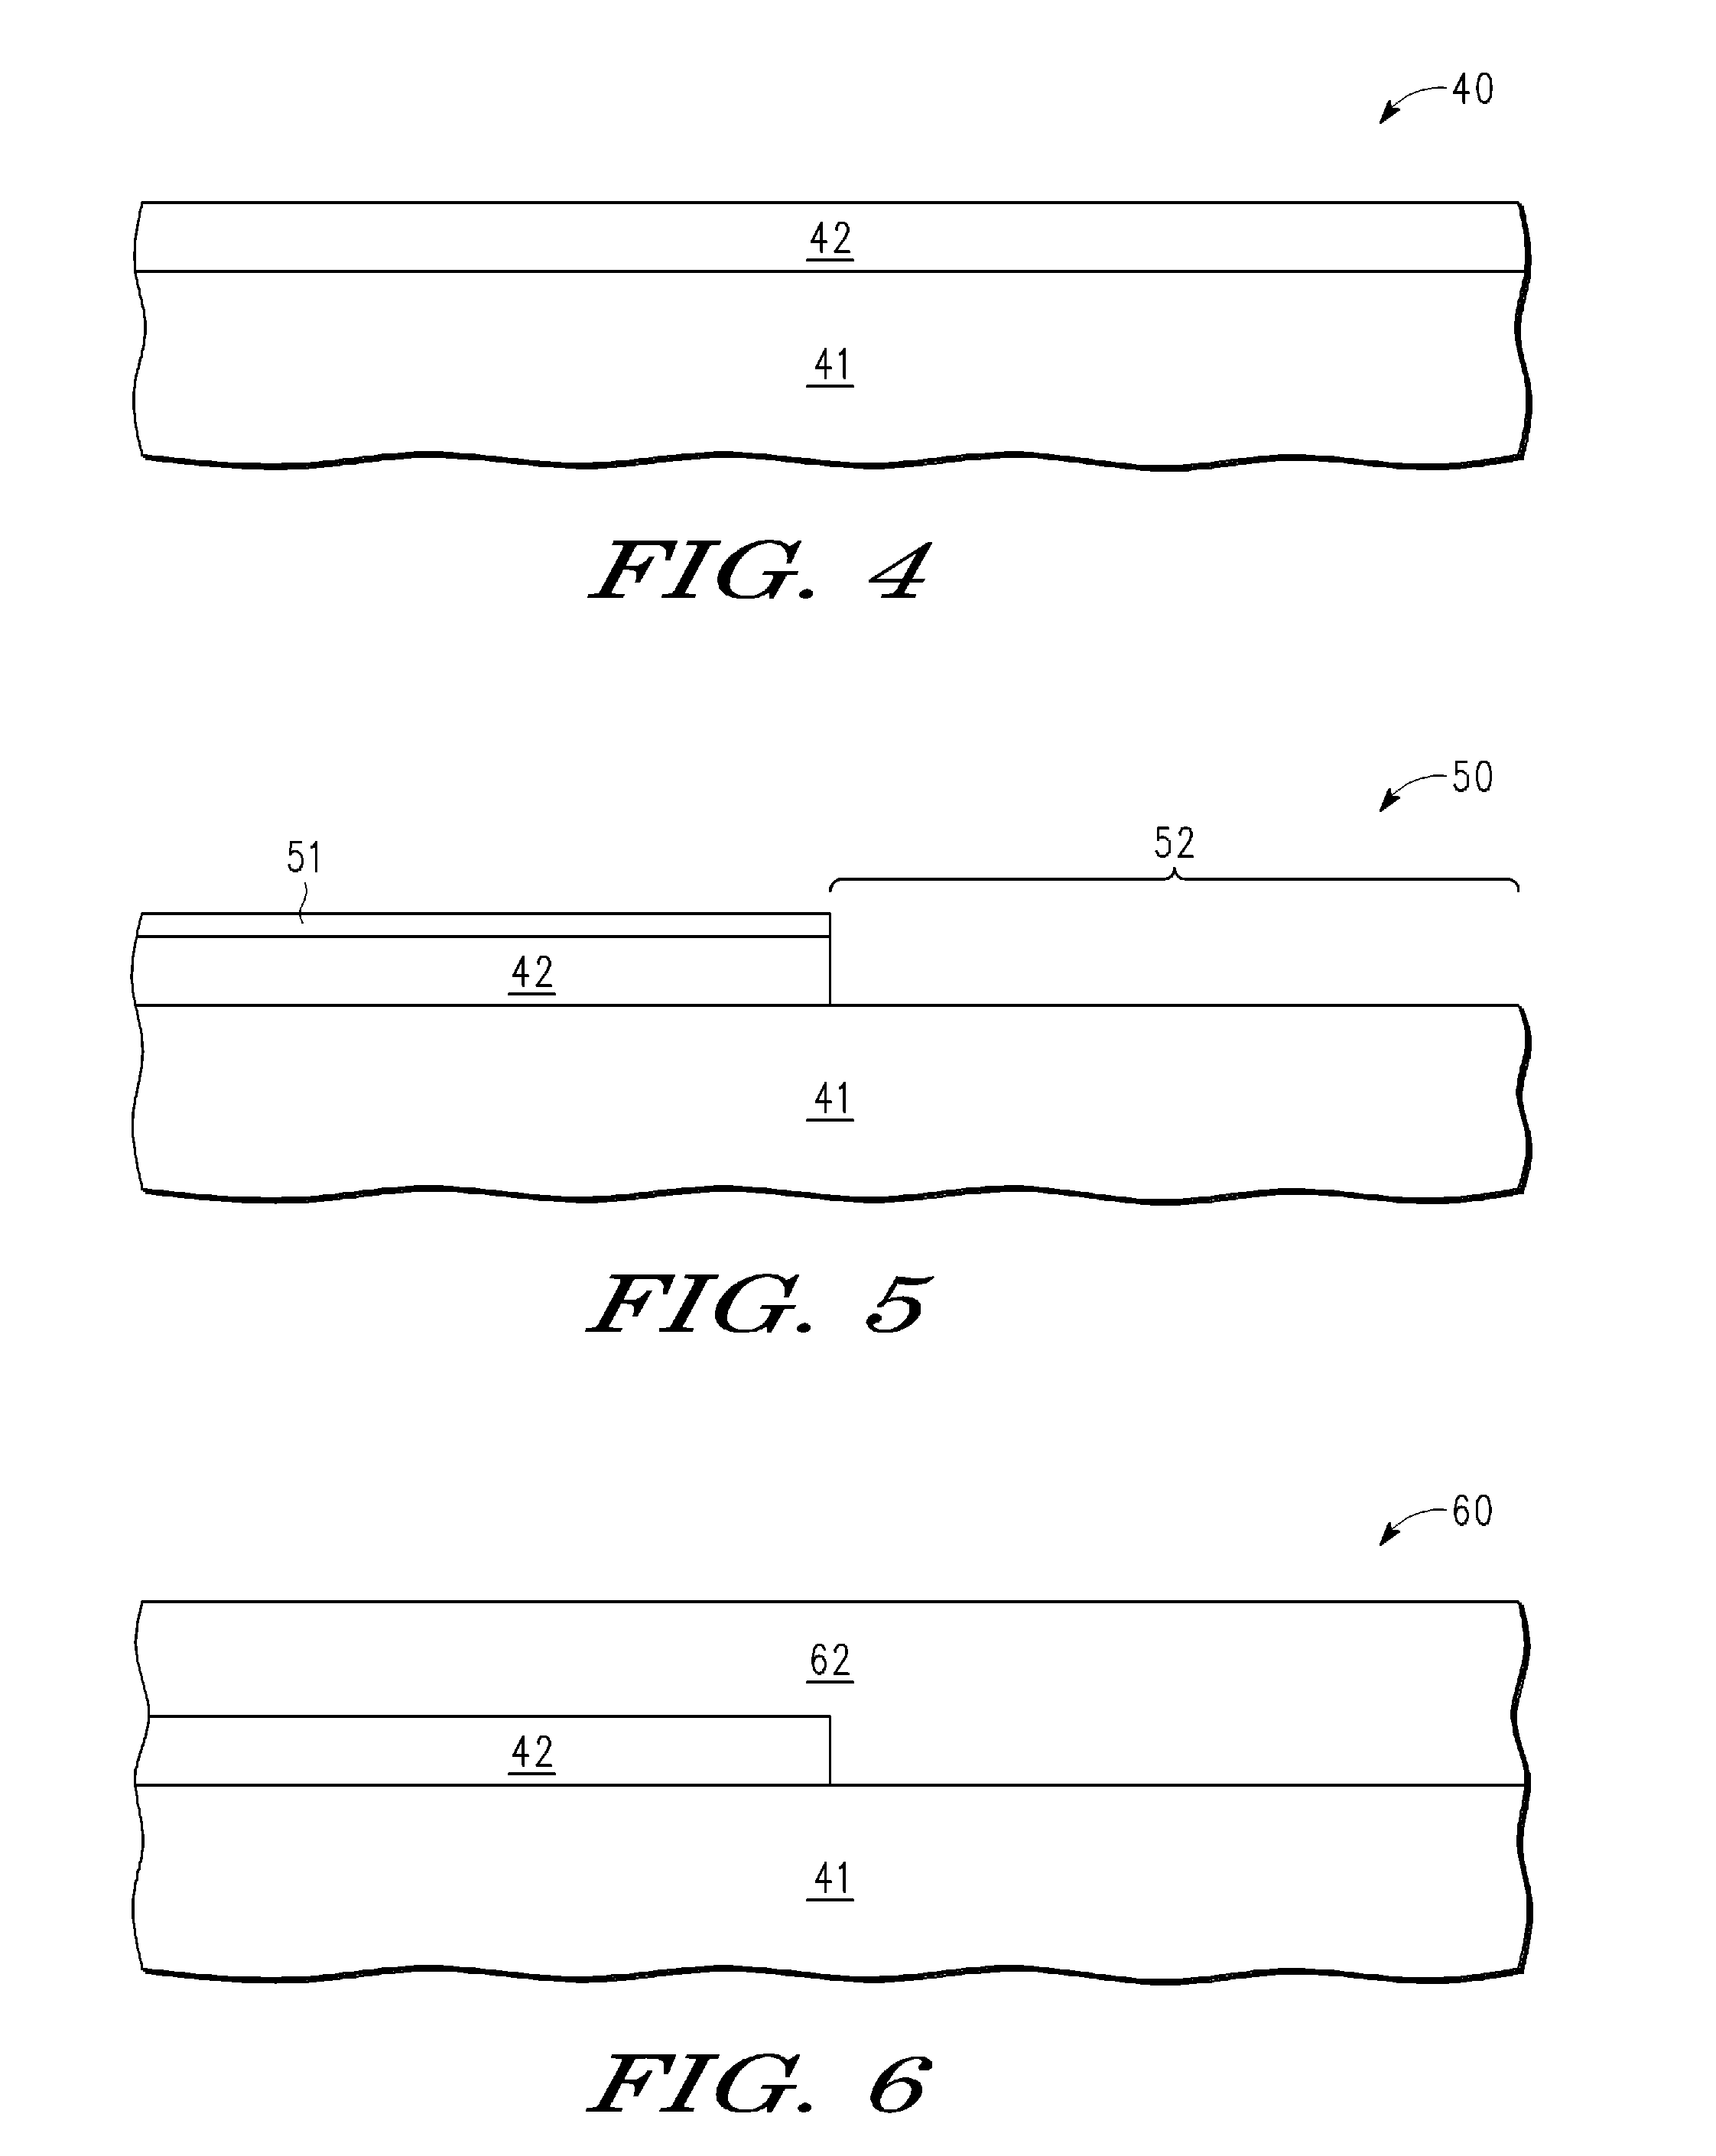 Inverse slope isolation and dual surface orientation integration